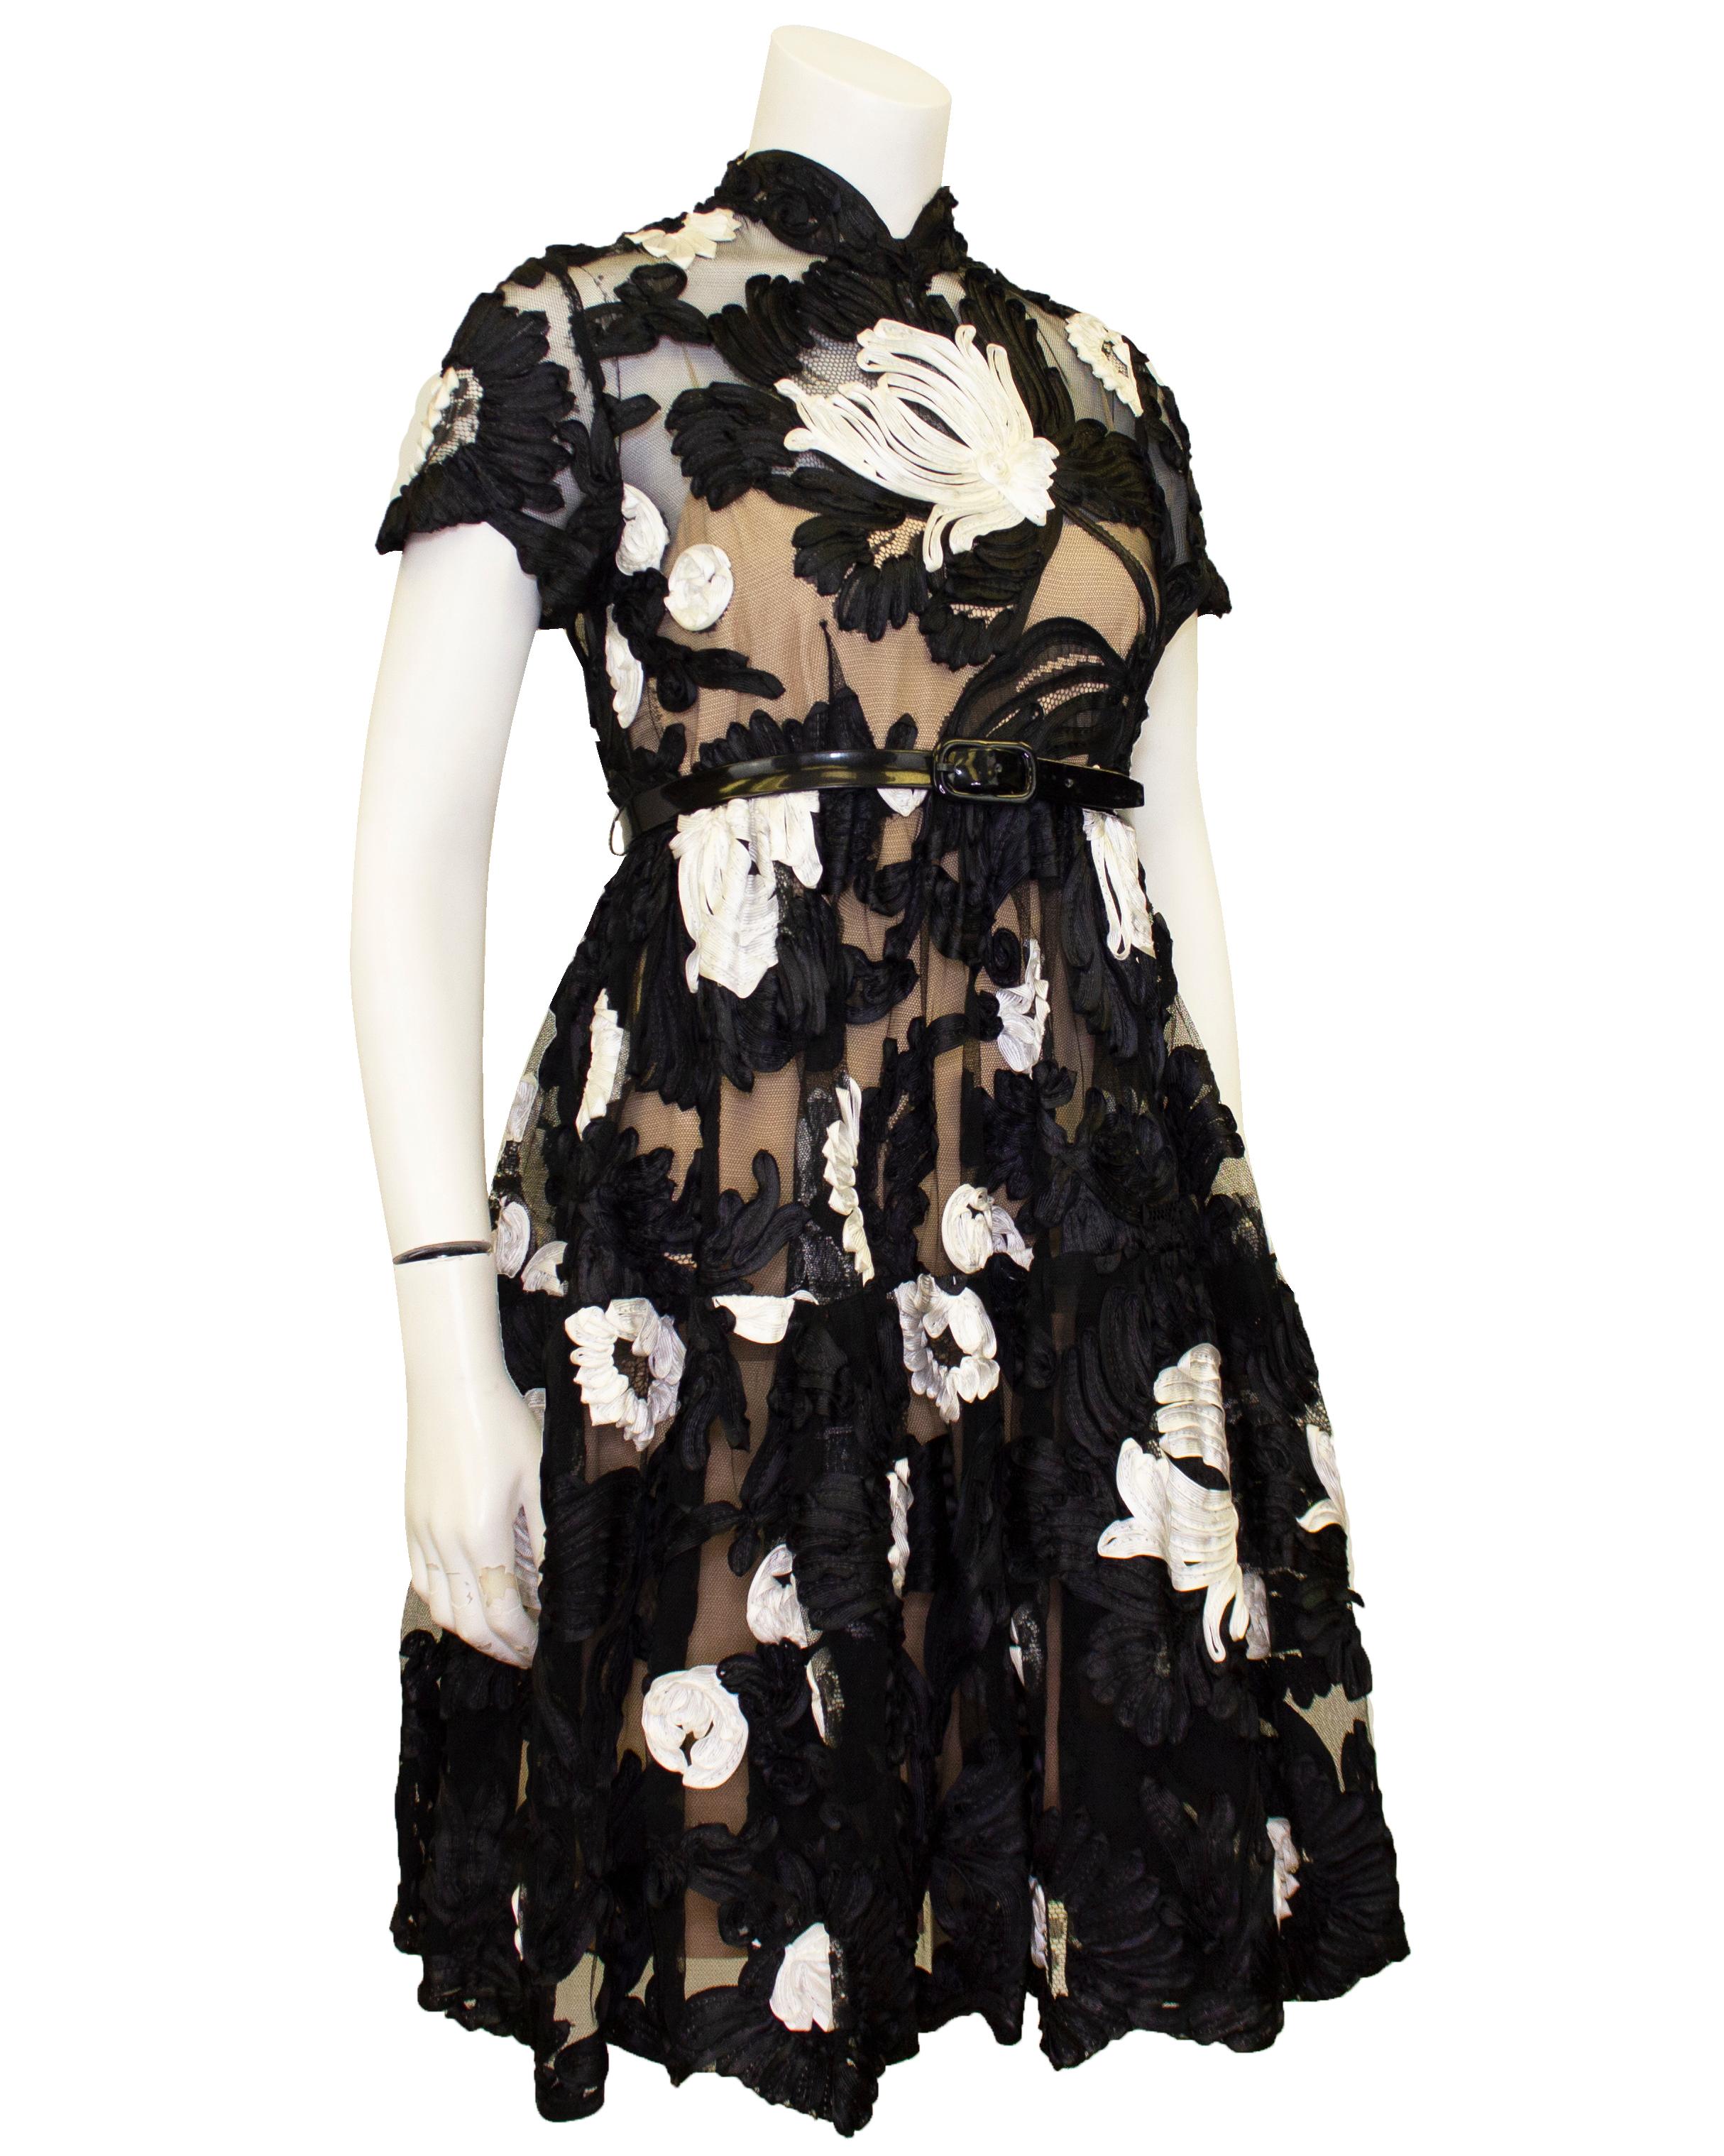 Deadstock early 1960's black lace and ribbon Bill Blass for Maurice Rentner cocktail dress. Short sleeve fitted bodice with raised collar and a swing skirt finished with a narrow black patent belt. Fully lined with a slip style liner in nude silk